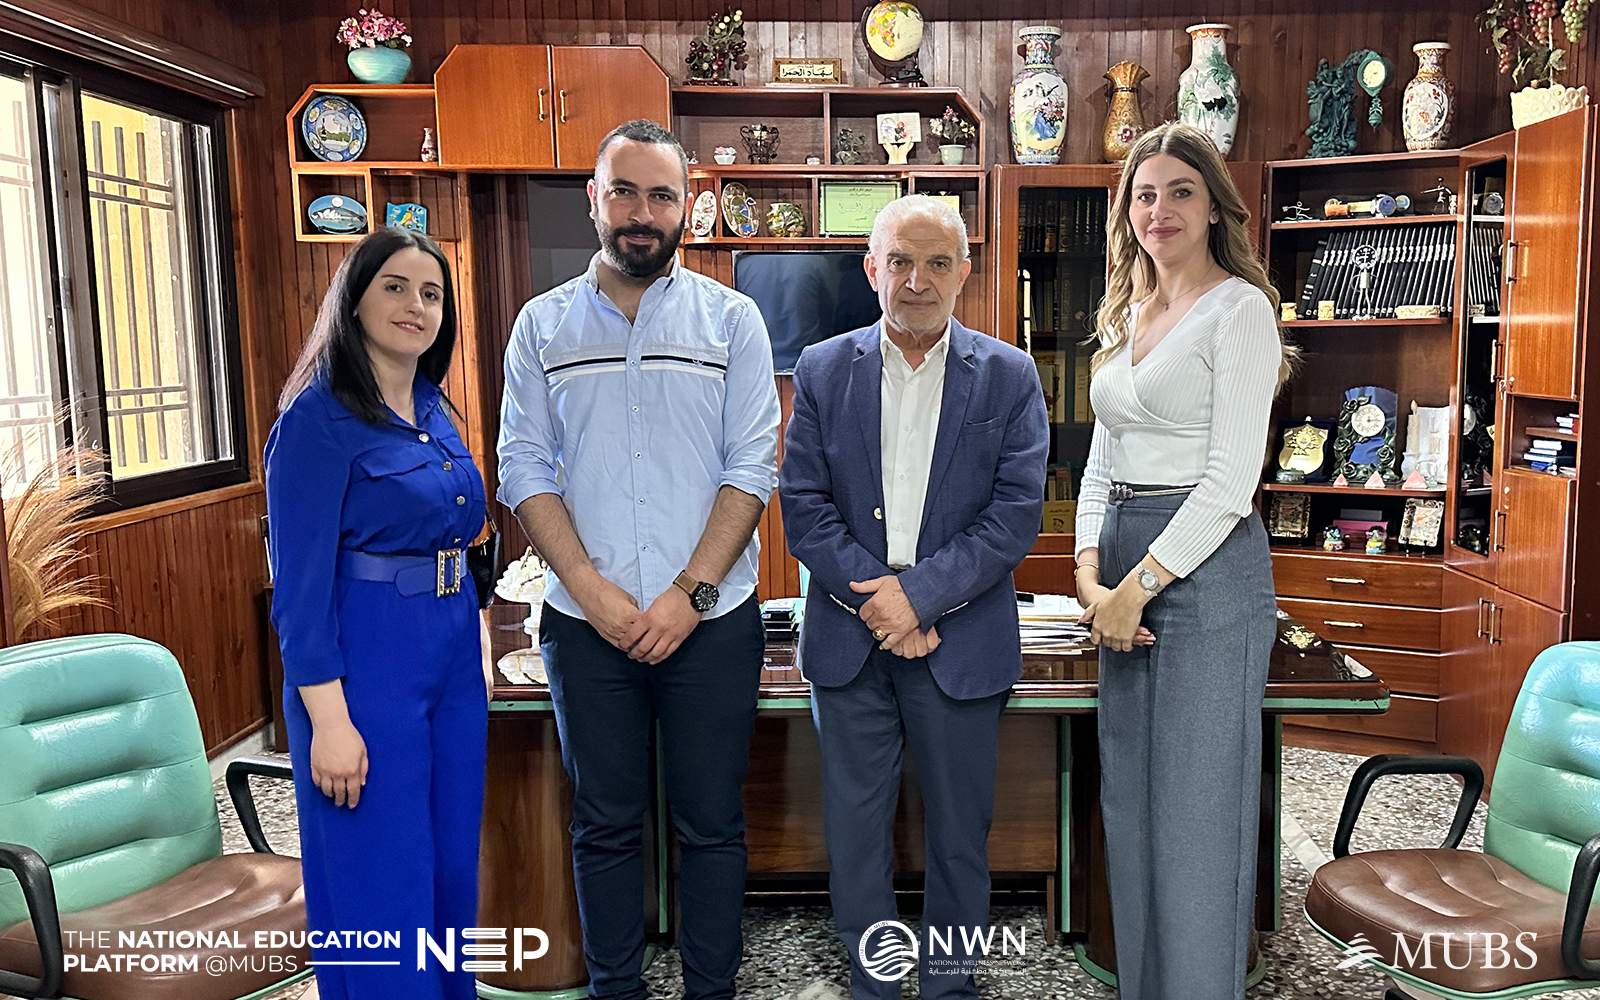 MUBS & NWN Organize a Health Day at the Lebanese Modern College (LMC) in Hasbaya as Part of the NEP